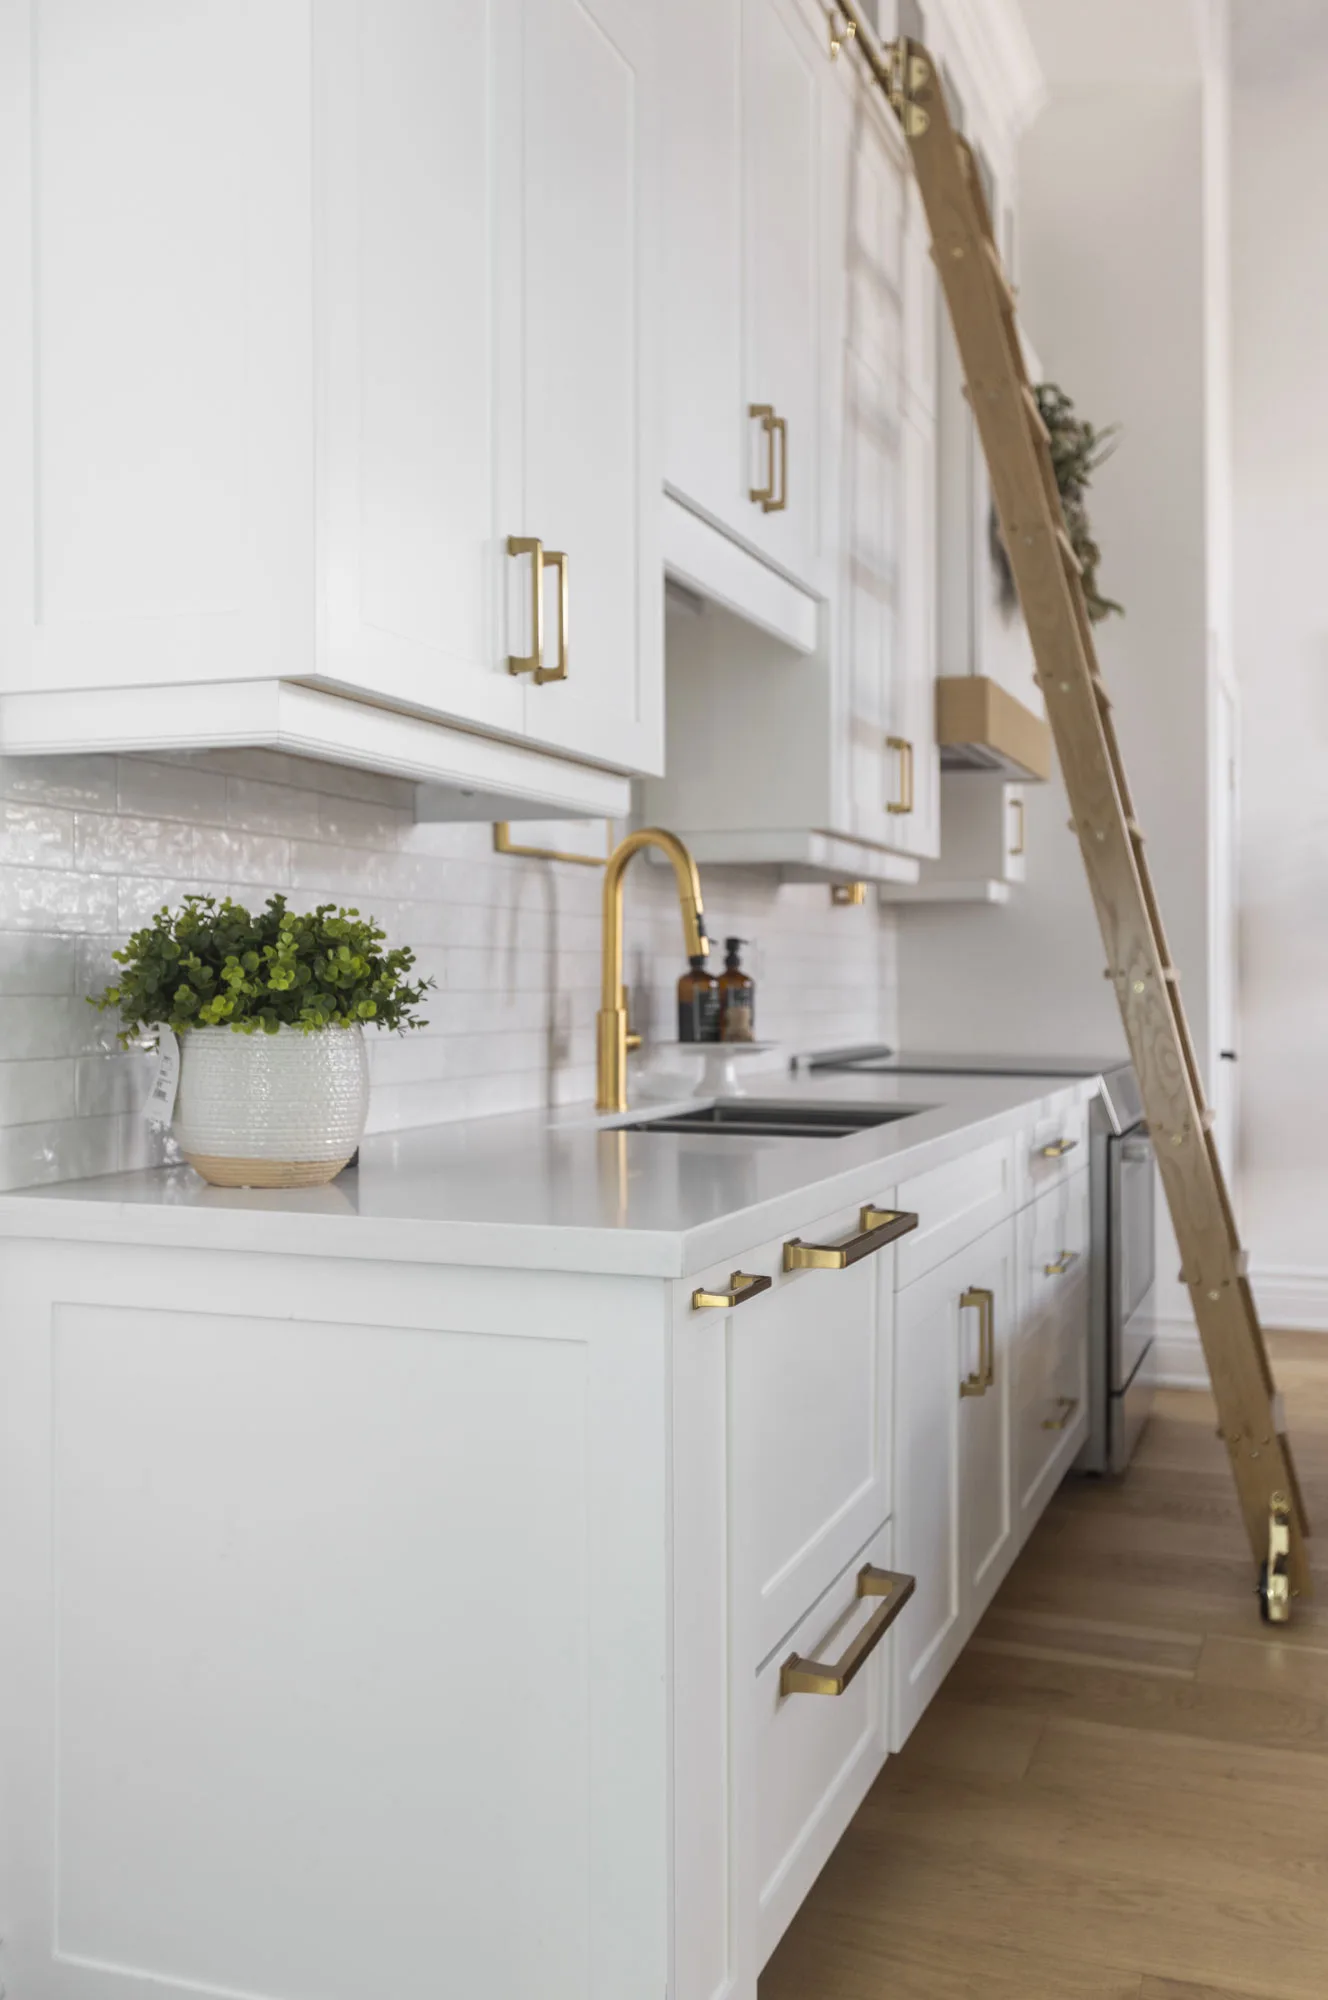 A side view of an all white modern kitchen with gold hardware with a gliding gold ladder